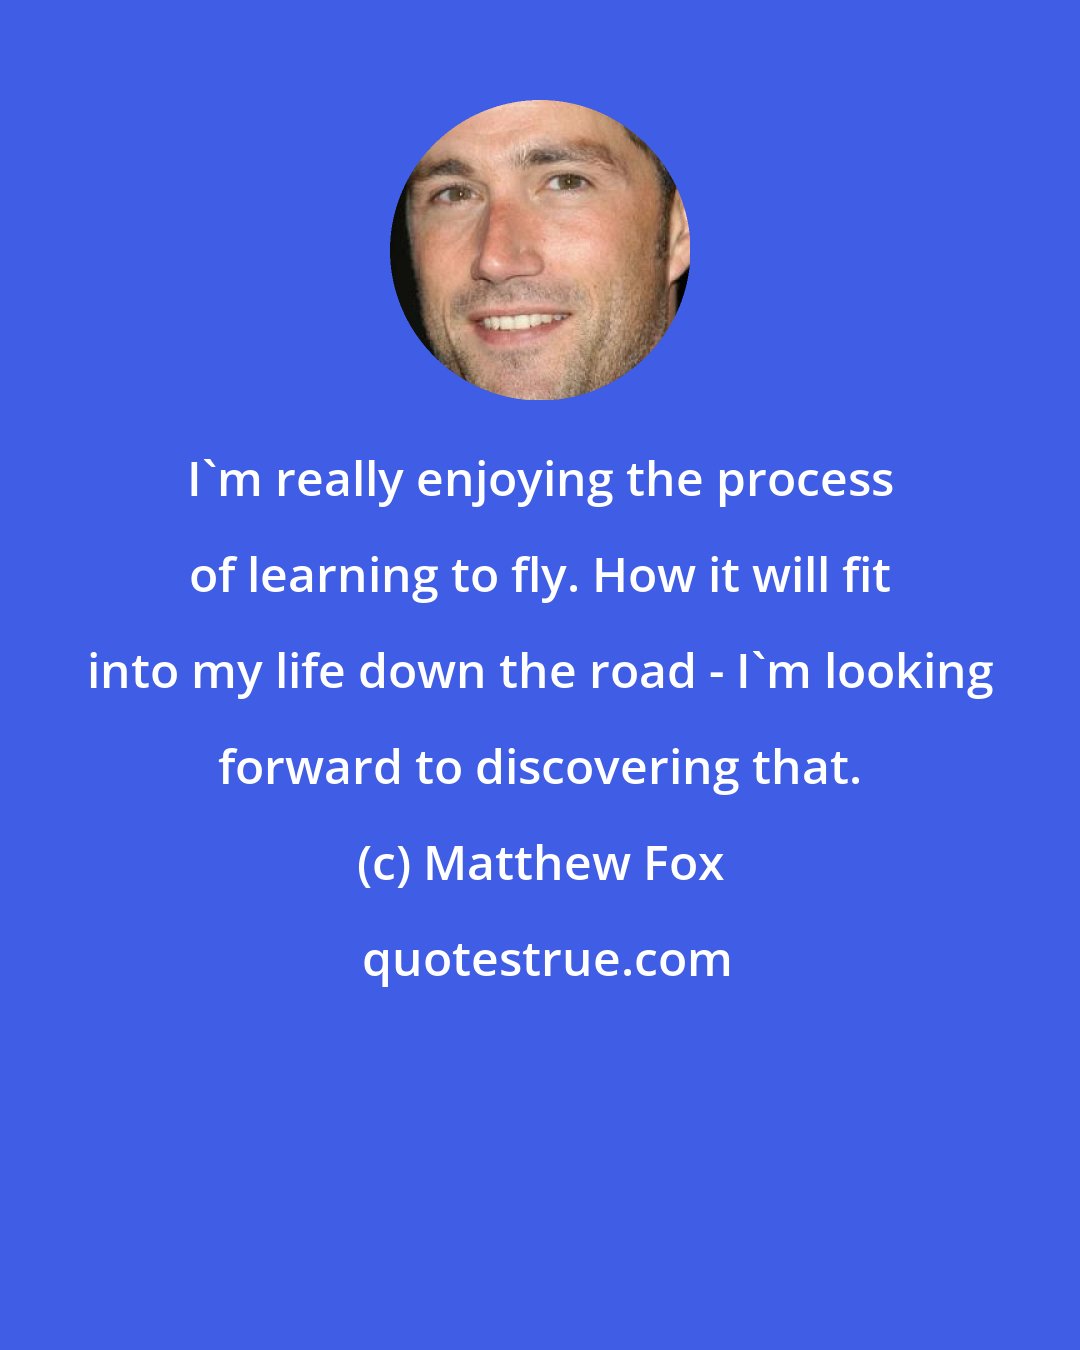 Matthew Fox: I'm really enjoying the process of learning to fly. How it will fit into my life down the road - I'm looking forward to discovering that.